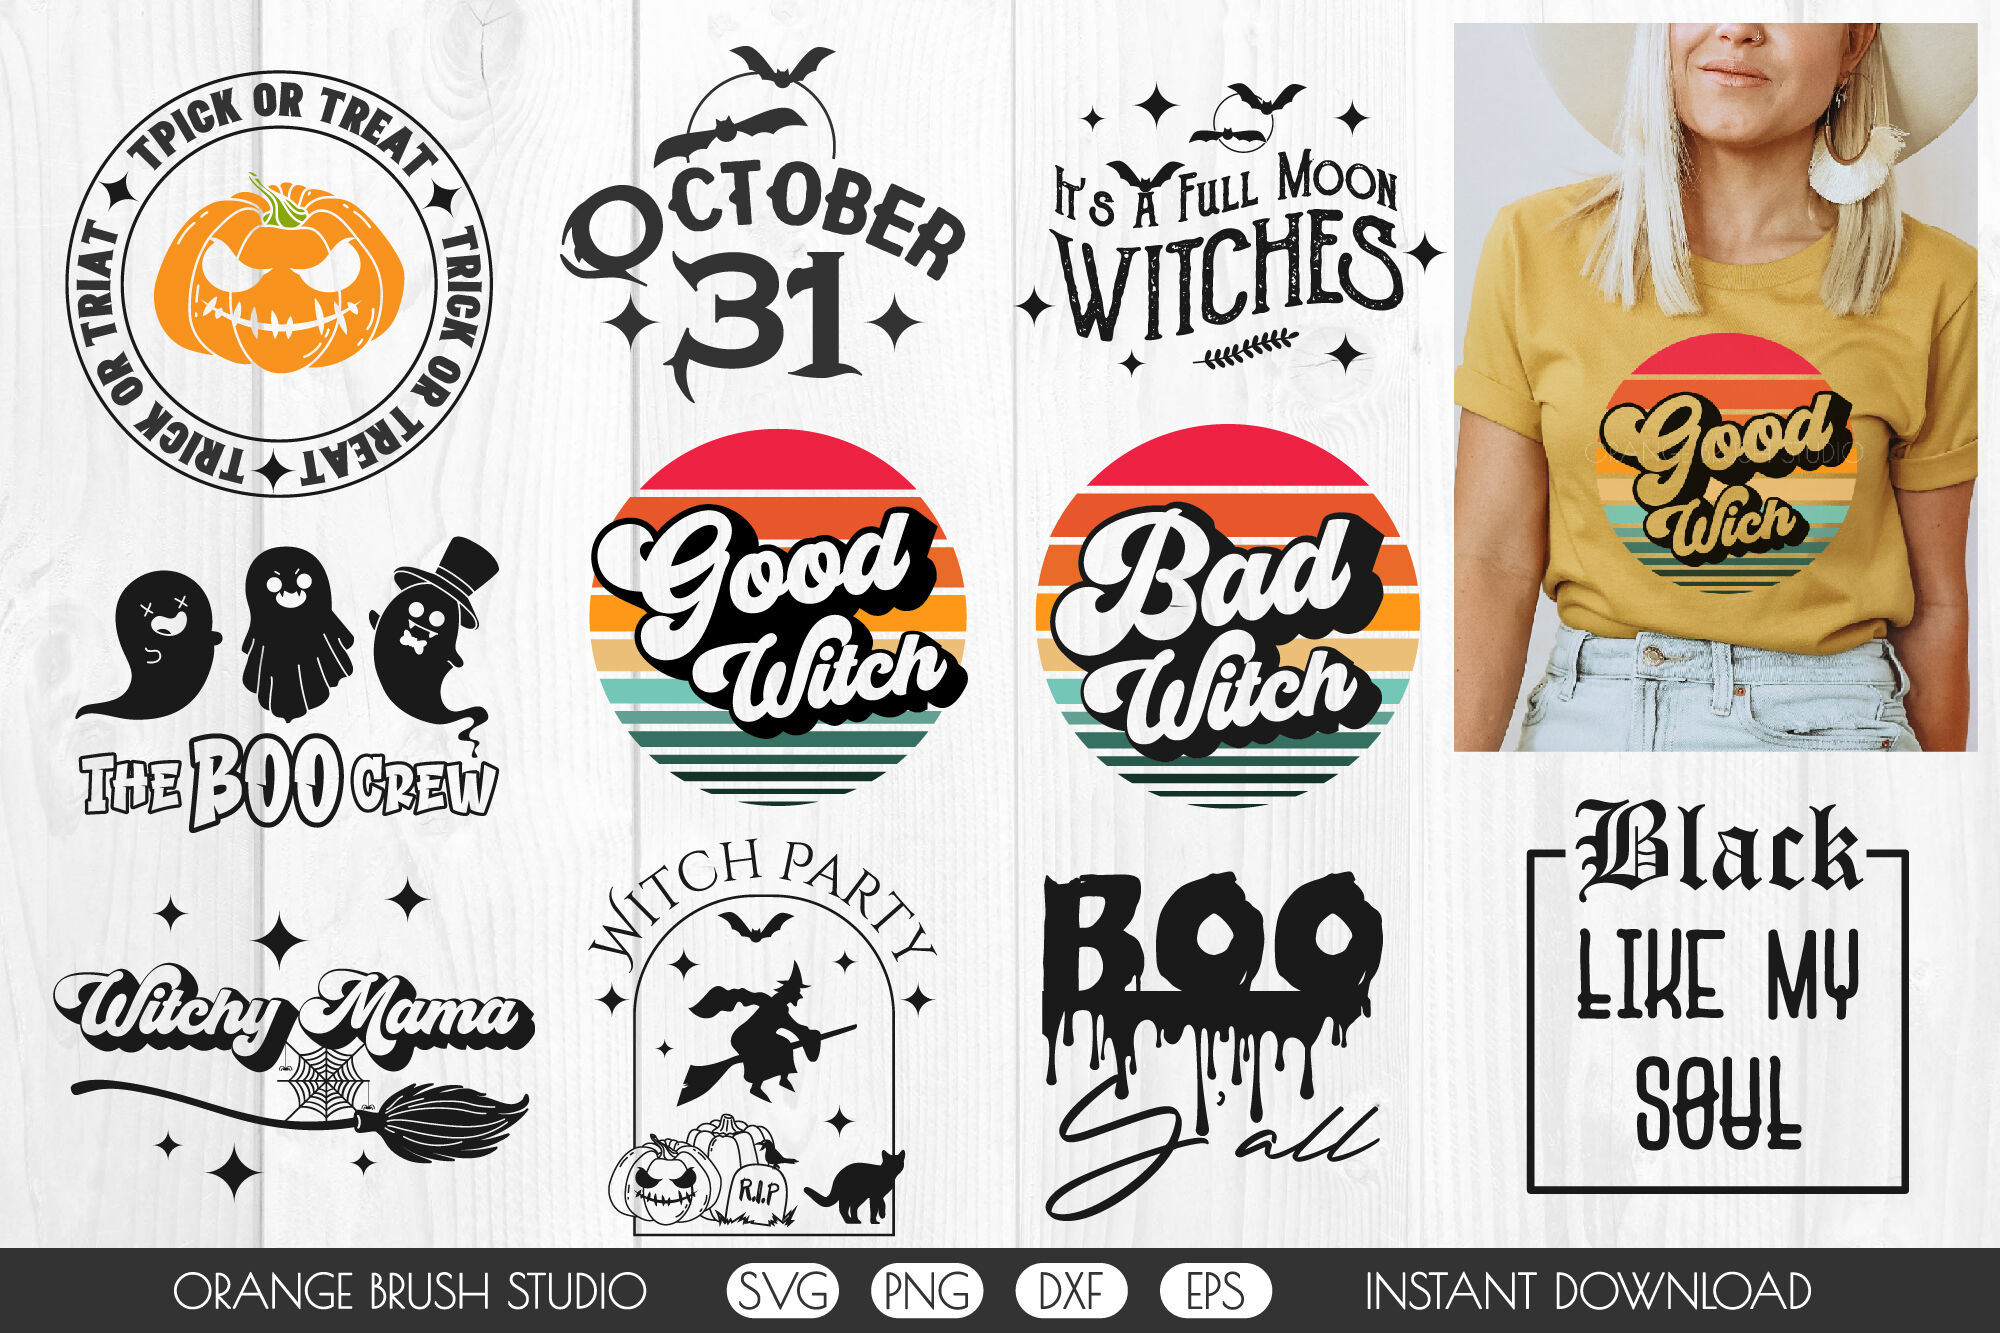 DIY Cricut Halloween Shirts for Witches - The Cards We Drew